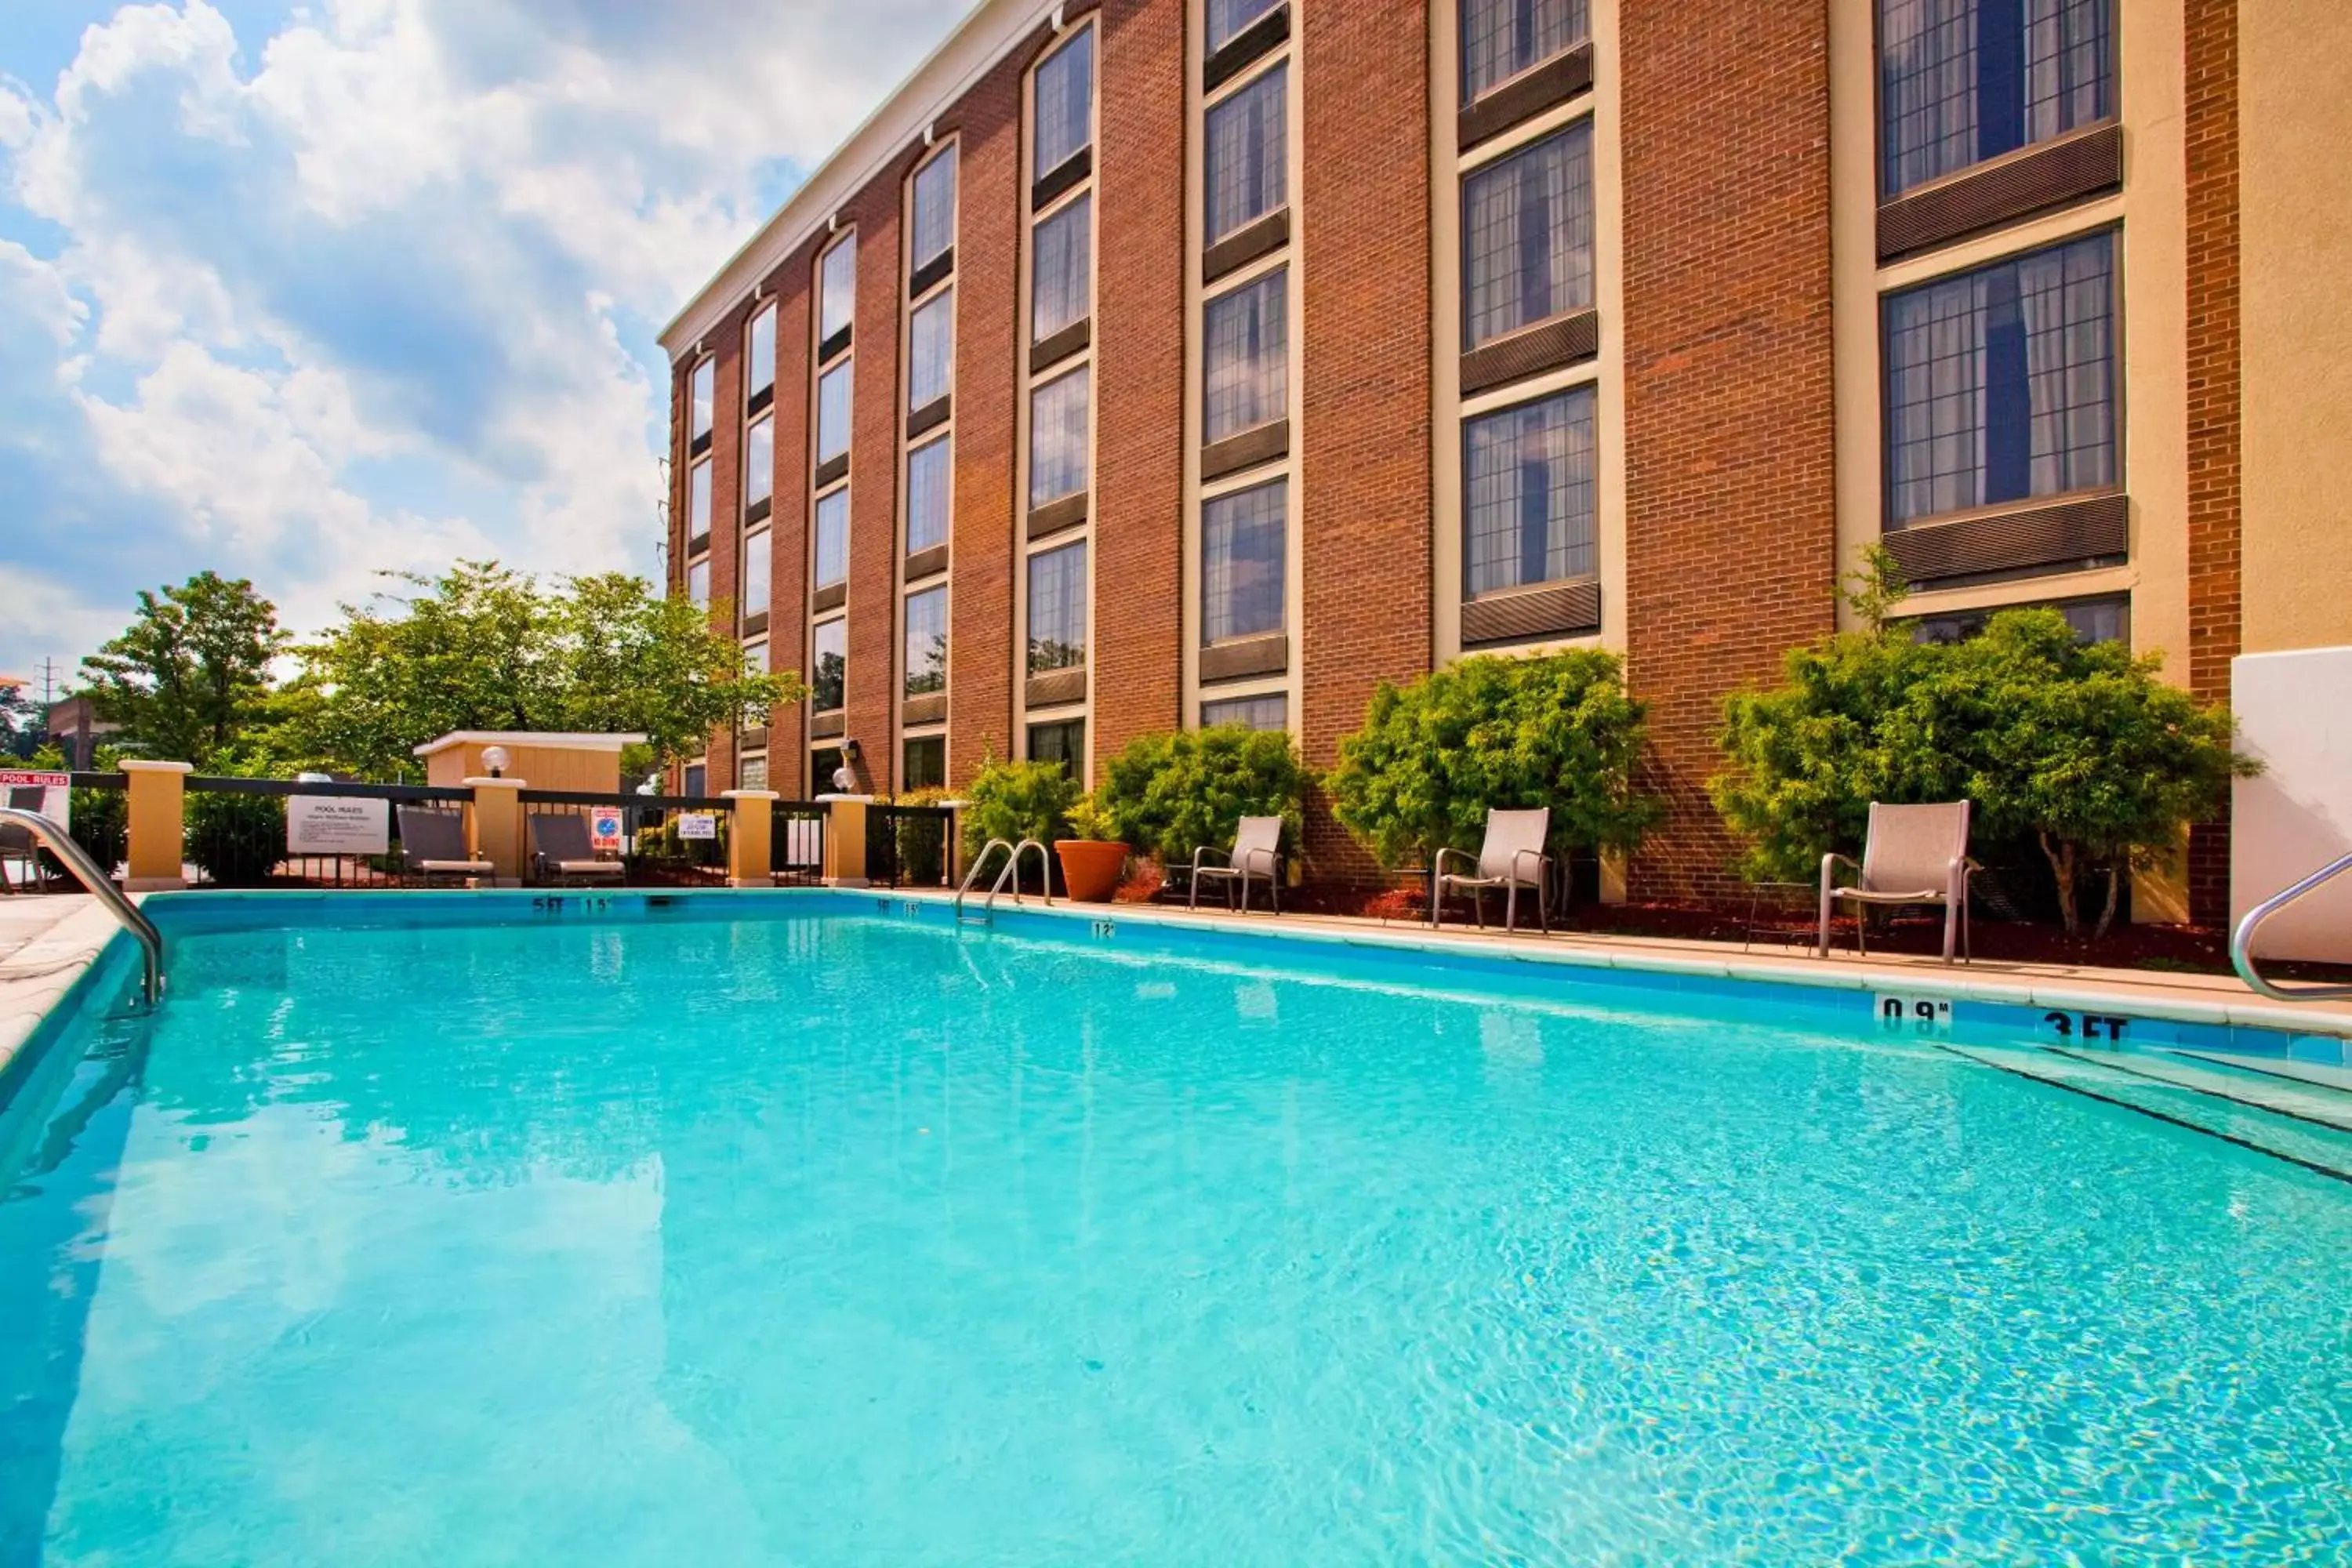 Swimming Pool in Holiday Inn Express Winston-Salem Medical Ctr Area